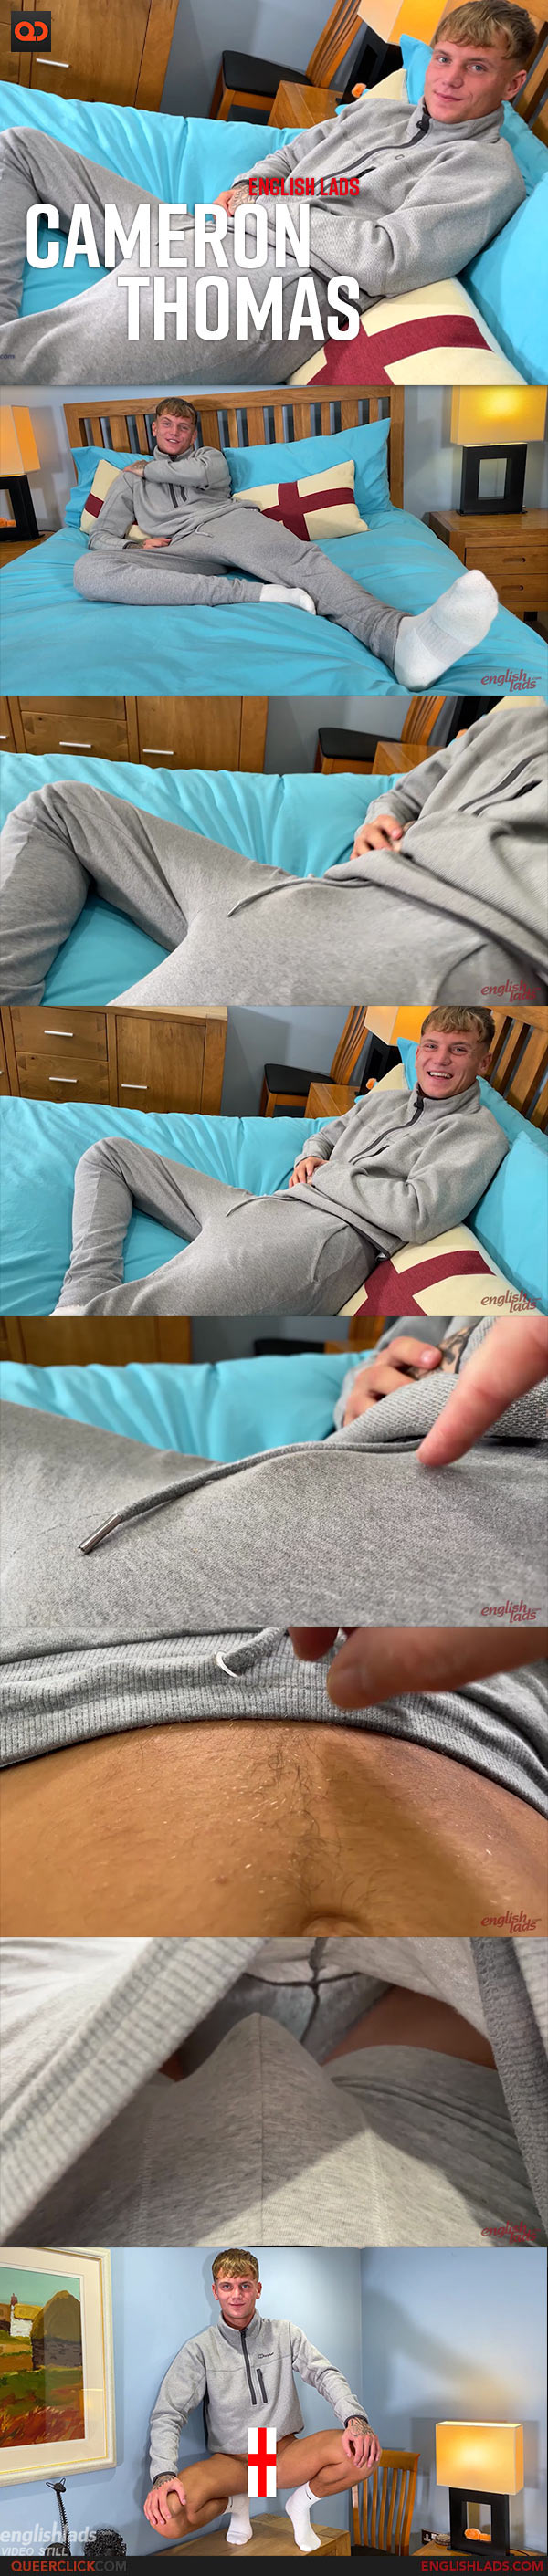 English Lads: Cameron Thomas - Young Cheeky Straight Lad gets Wanked and Spanked